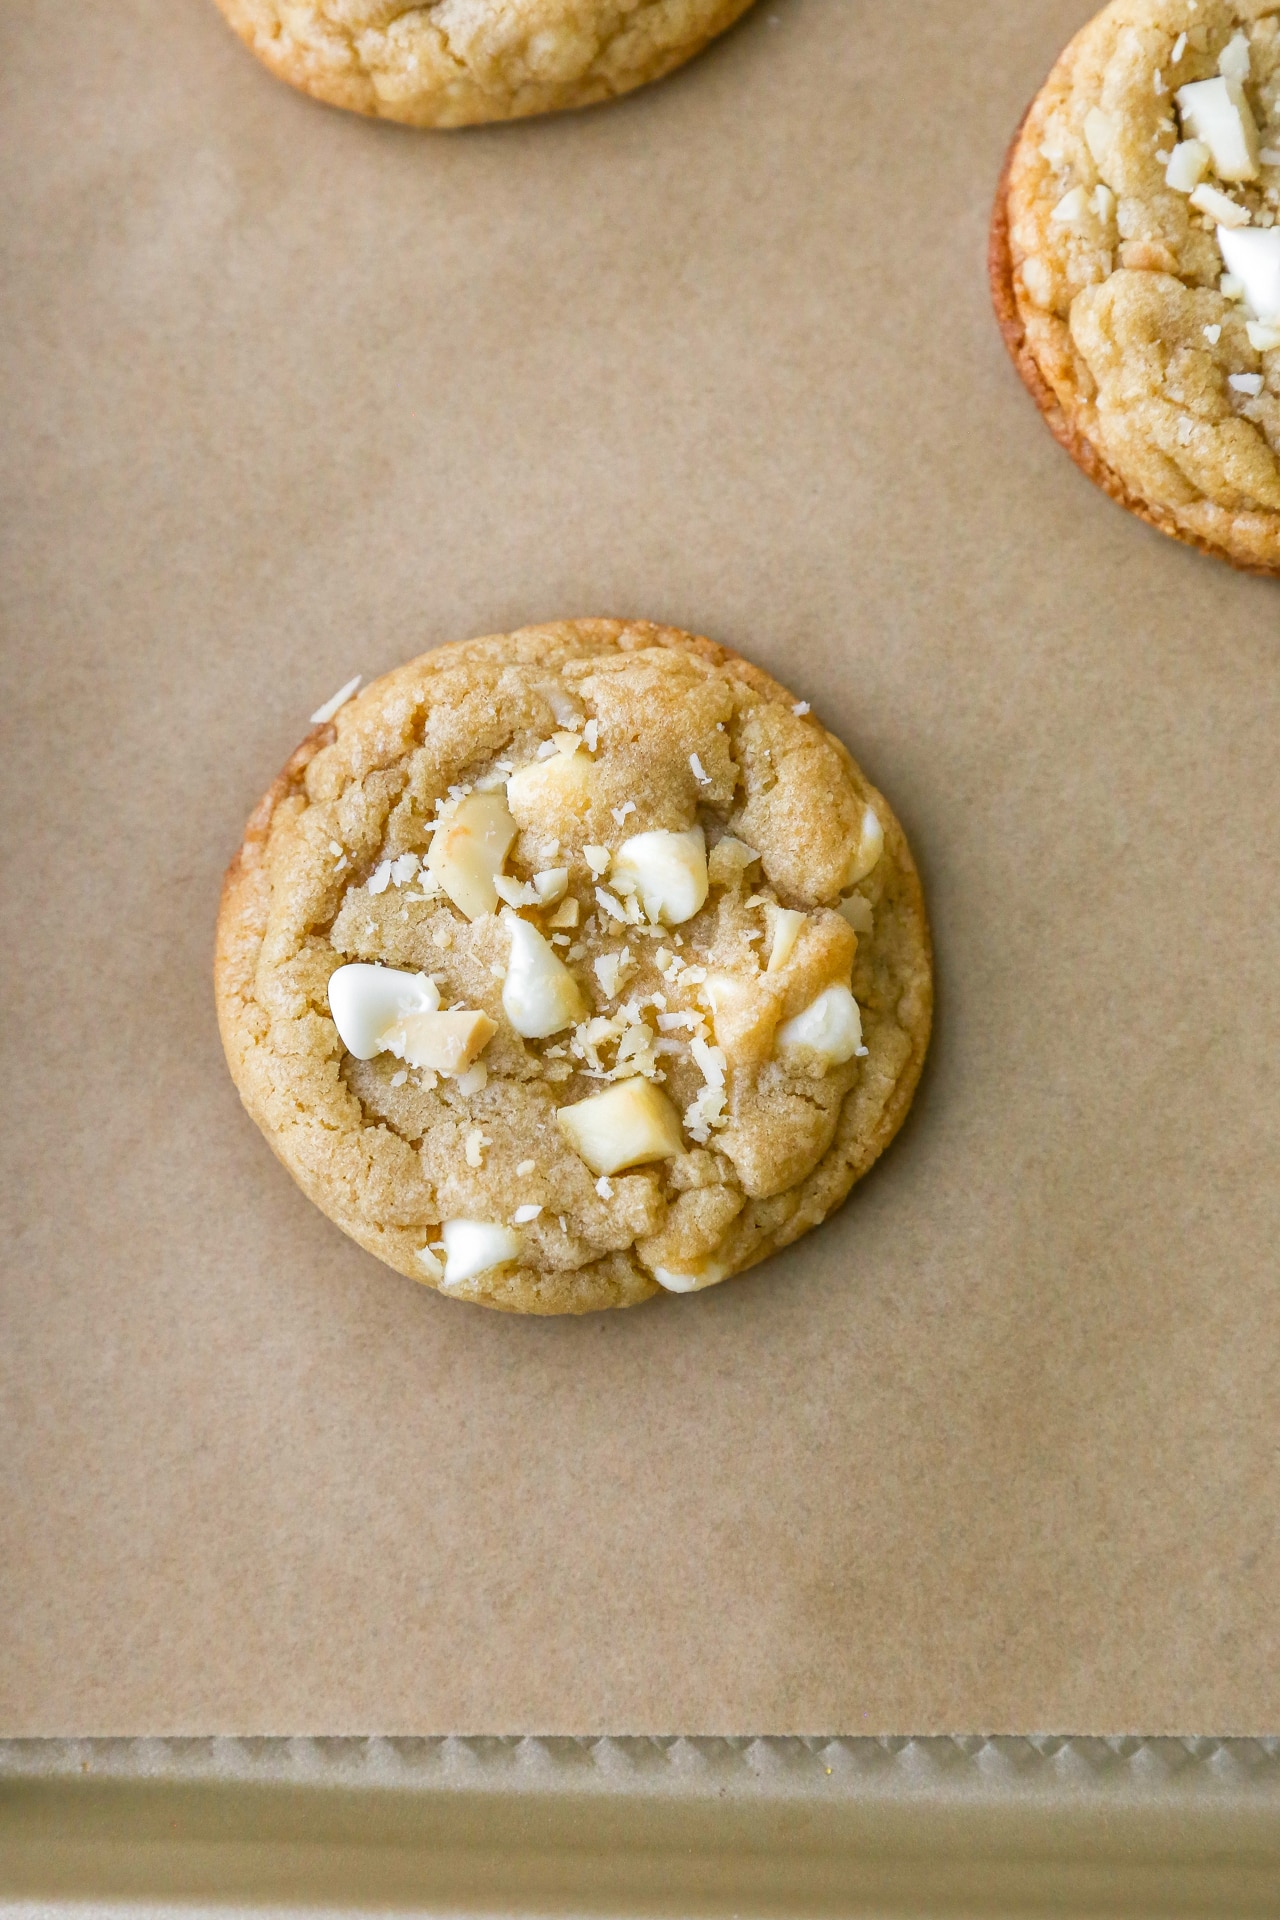 A baked white chocolate macadamia nut cookie on a baking sheet.